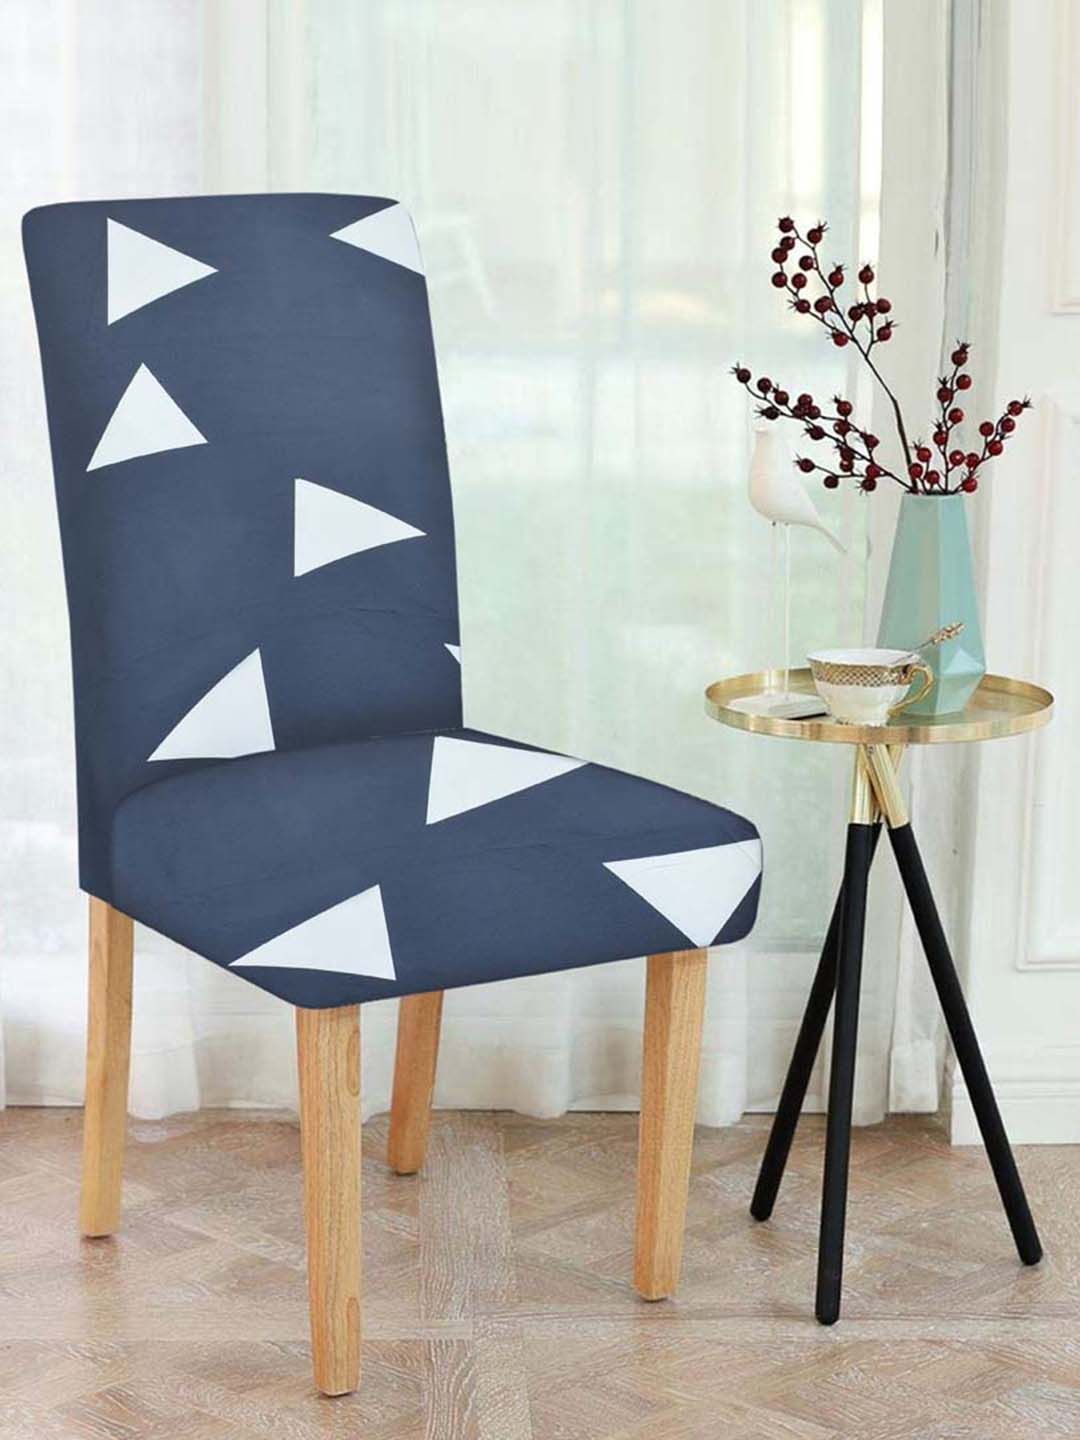 Slushy Mushy Set of 6 Blue & White Printed Chair Covers Price in India